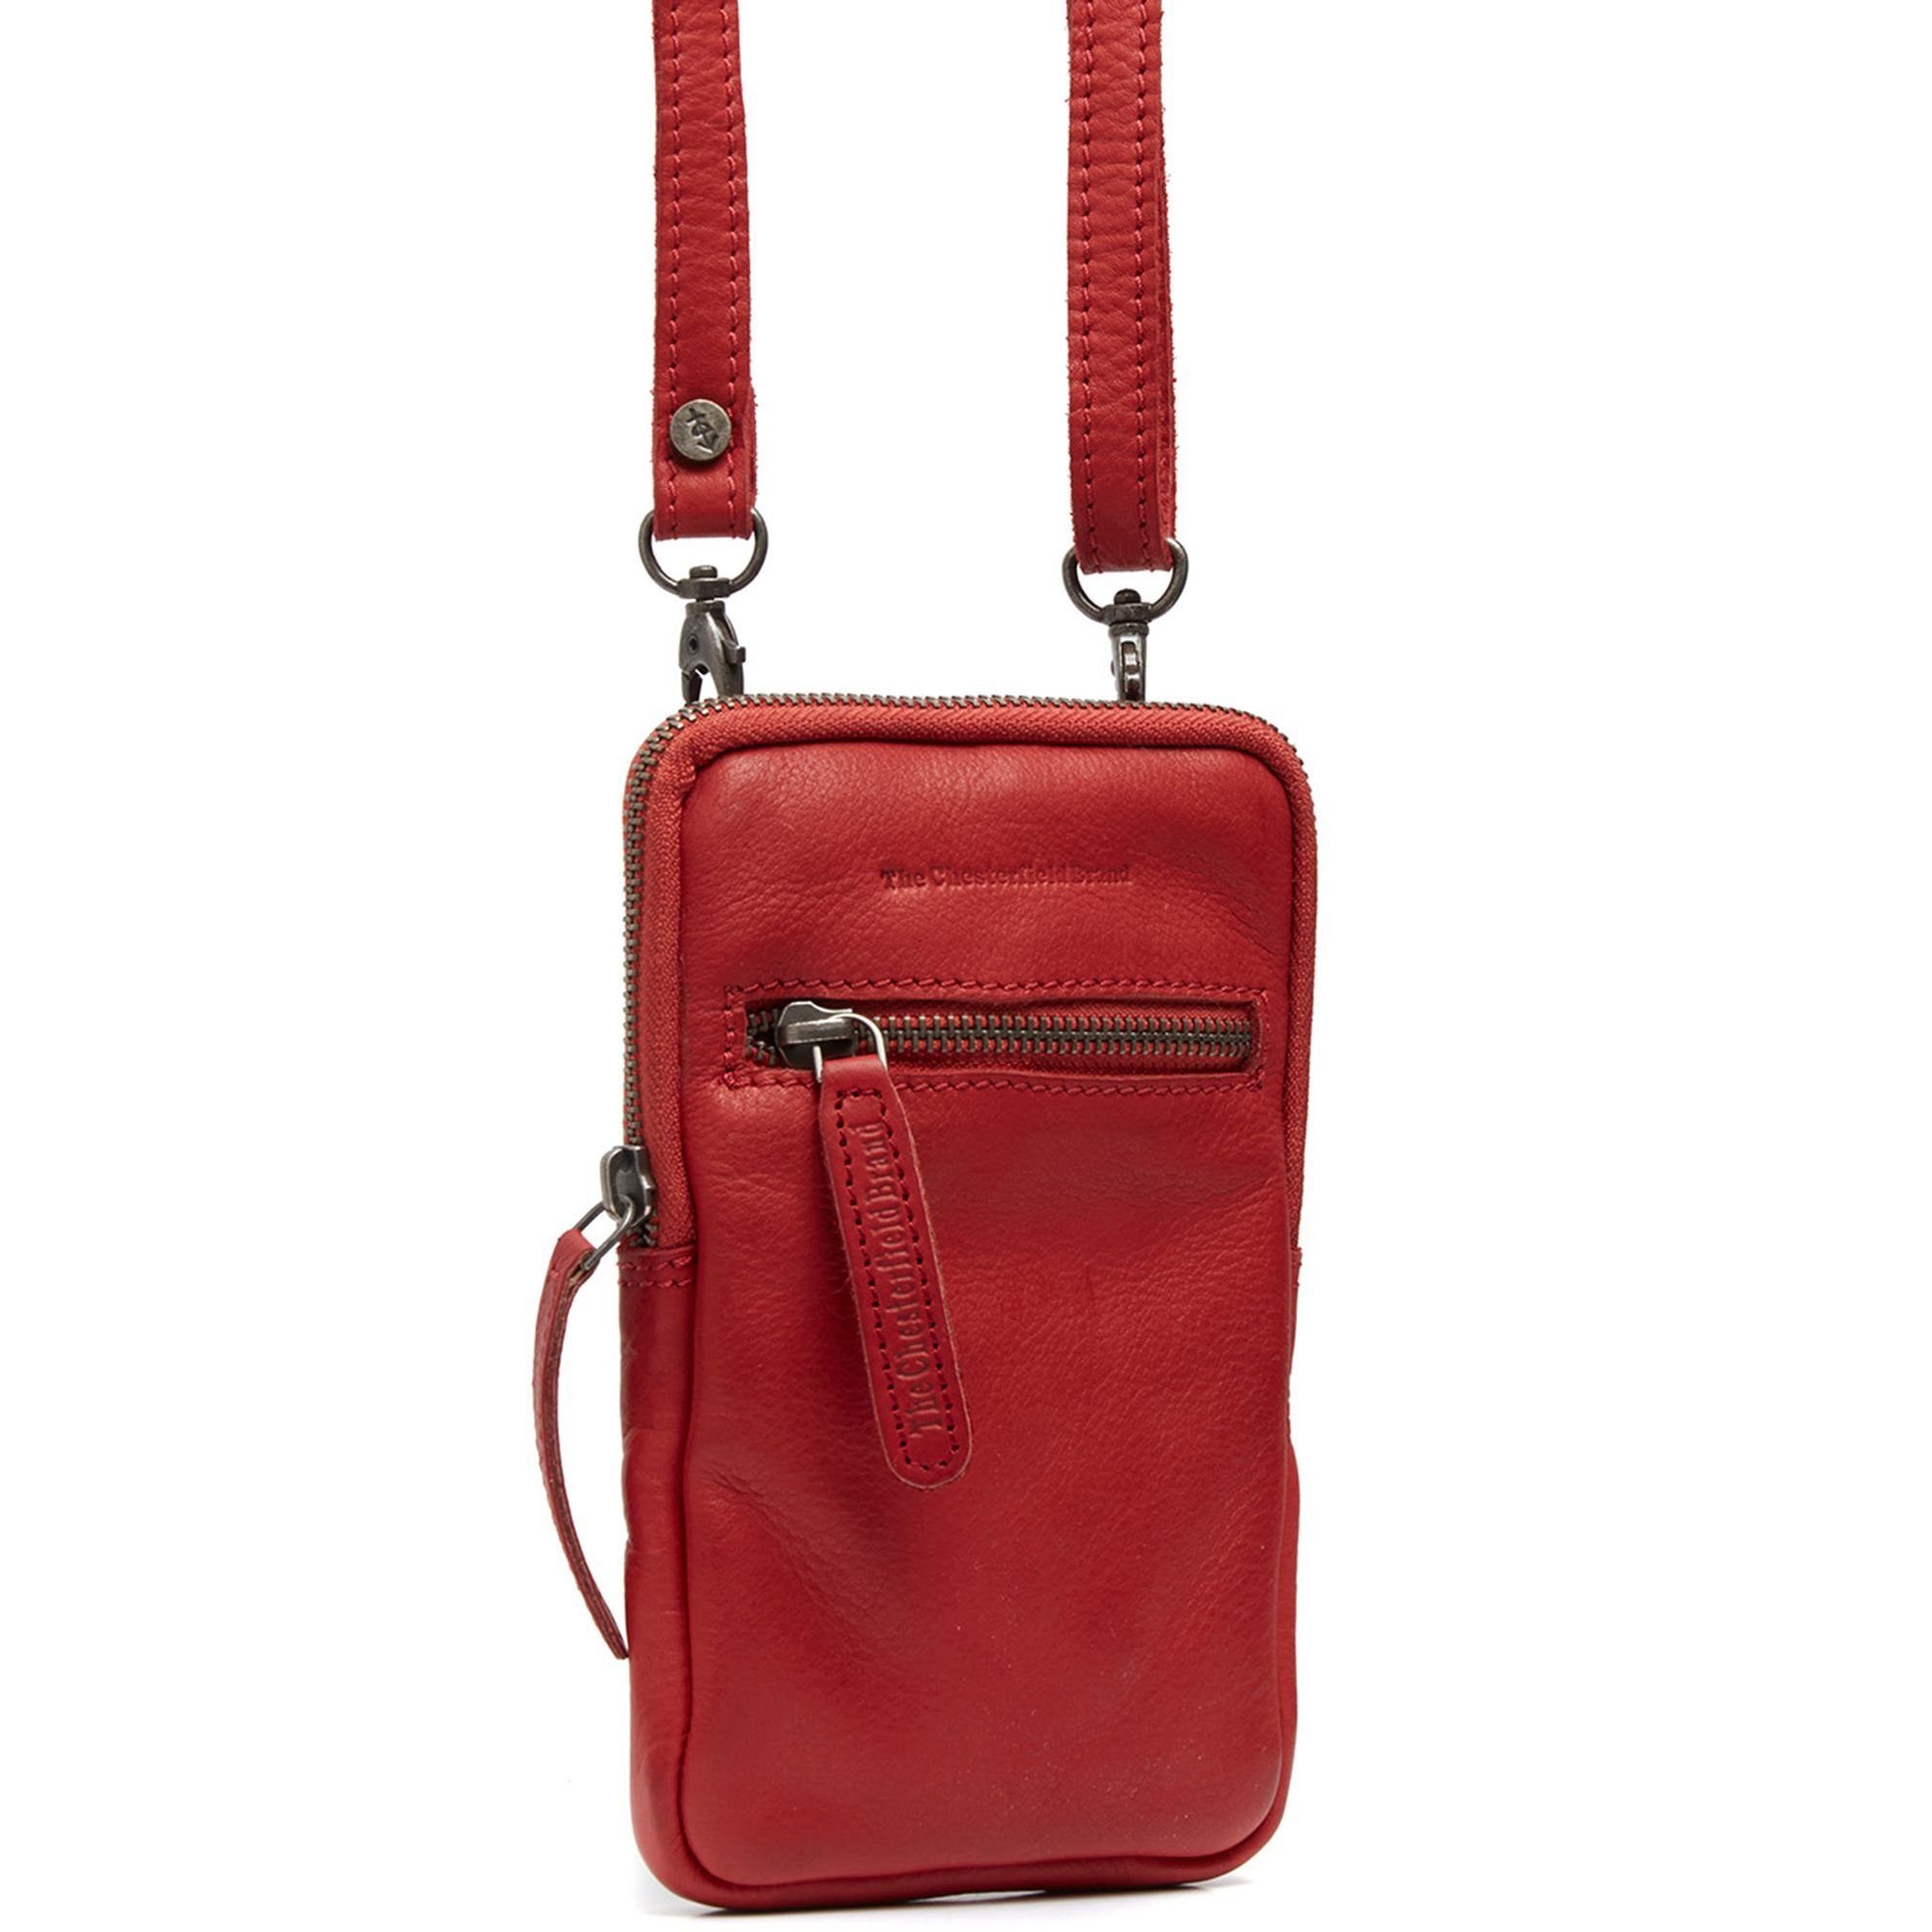 The Leder Smartphone-Hülle, Brand Chesterfield red